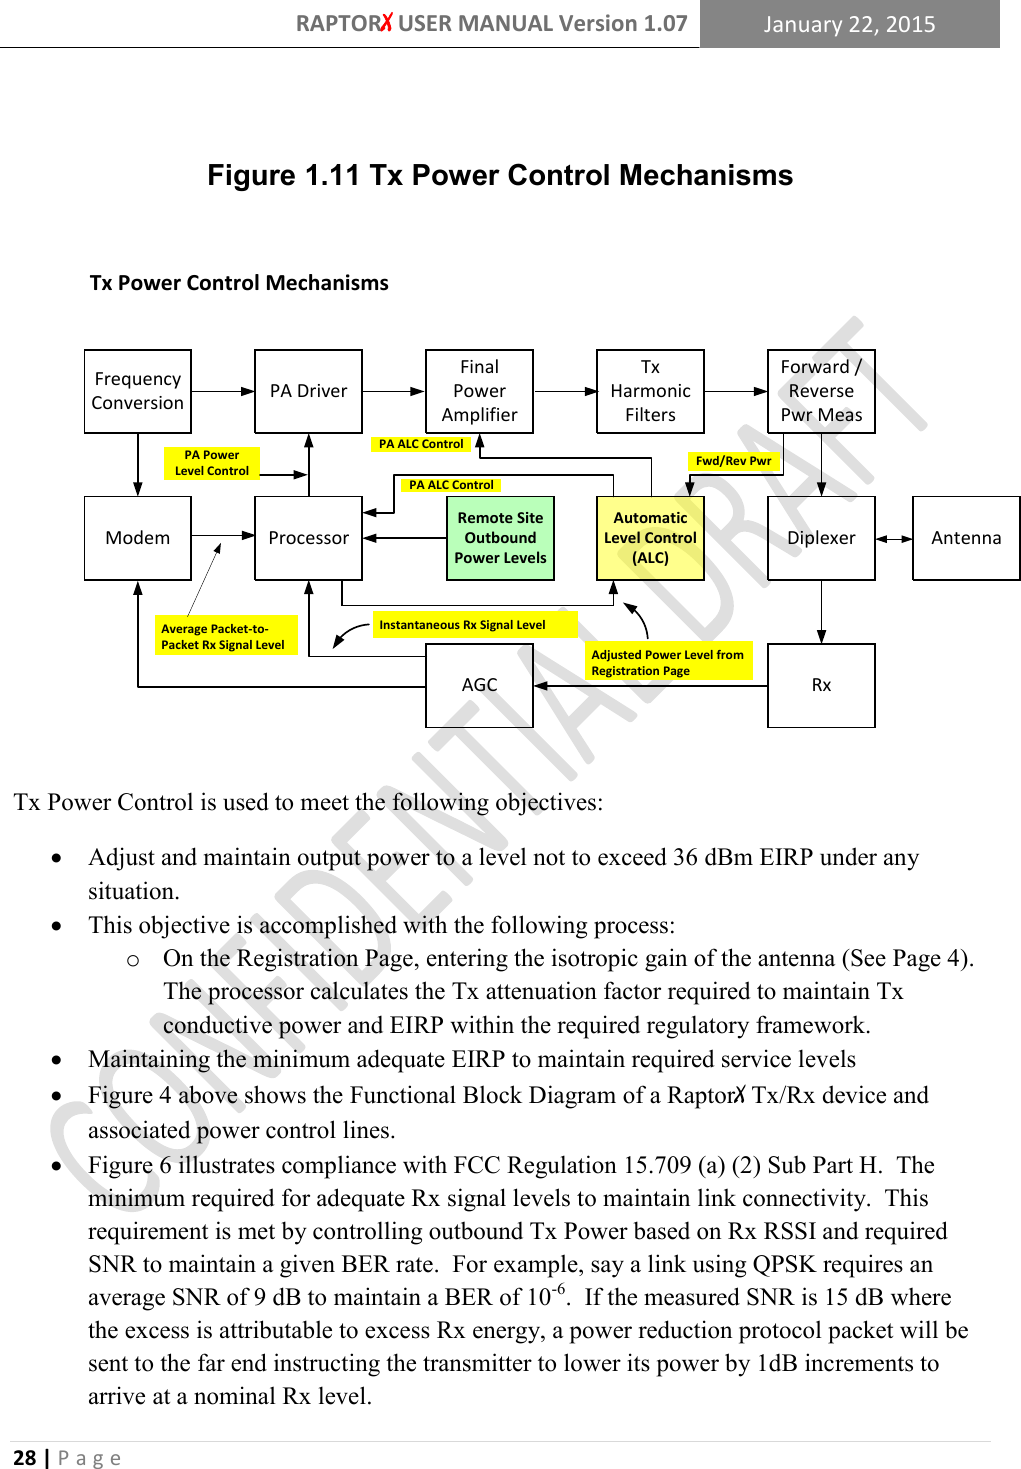 RAPTORX USER MANUAL Version 1.07 January 22, 2015  28 | P a g e    Figure 1.11 Tx Power Control Mechanisms Tx Power Control MechanismsModemFrequency Conversion  PA Driver Final Power AmplifierTx Harmonic FiltersForward / Reverse Pwr MeasDiplexerRxAGCAntennaProcessorInstantaneous Rx Signal LevelAverage Packet-to-Packet Rx Signal LevelRemote Site Outbound Power Levels PA Power Level Control Automatic Level Control (ALC)Fwd/Rev PwrAdjusted Power Level from Registration PagePA ALC ControlPA ALC Control Tx Power Control is used to meet the following objectives:  Adjust and maintain output power to a level not to exceed 36 dBm EIRP under any situation.  This objective is accomplished with the following process: o On the Registration Page, entering the isotropic gain of the antenna (See Page 4).  The processor calculates the Tx attenuation factor required to maintain Tx conductive power and EIRP within the required regulatory framework.  Maintaining the minimum adequate EIRP to maintain required service levels  Figure 4 above shows the Functional Block Diagram of a RaptorX Tx/Rx device and associated power control lines.  Figure 6 illustrates compliance with FCC Regulation 15.709 (a) (2) Sub Part H.  The minimum required for adequate Rx signal levels to maintain link connectivity.  This requirement is met by controlling outbound Tx Power based on Rx RSSI and required SNR to maintain a given BER rate.  For example, say a link using QPSK requires an average SNR of 9 dB to maintain a BER of 10-6.  If the measured SNR is 15 dB where the excess is attributable to excess Rx energy, a power reduction protocol packet will be sent to the far end instructing the transmitter to lower its power by 1dB increments to arrive at a nominal Rx level. 